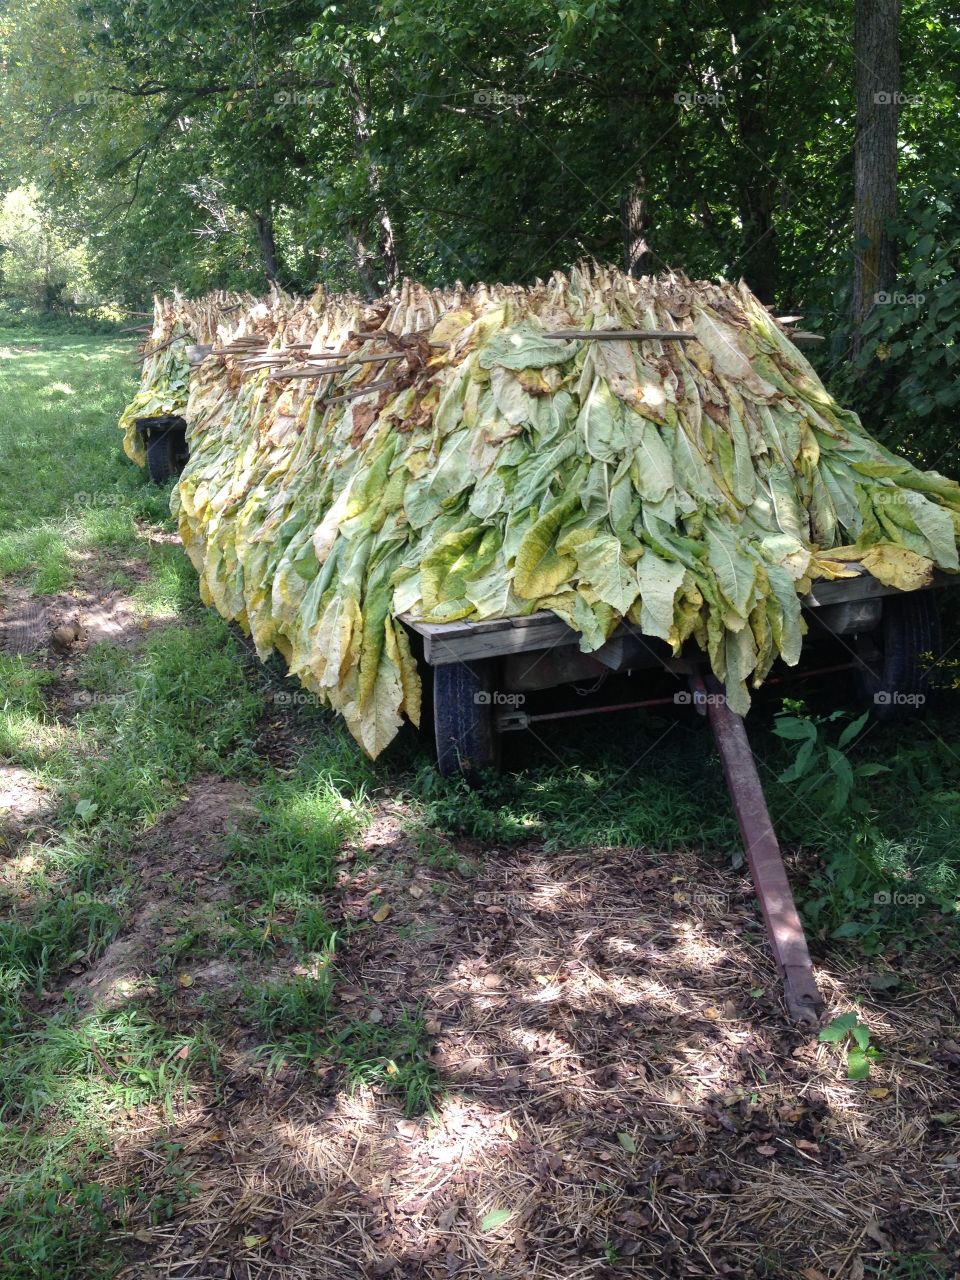 Shade of leaves made on cart